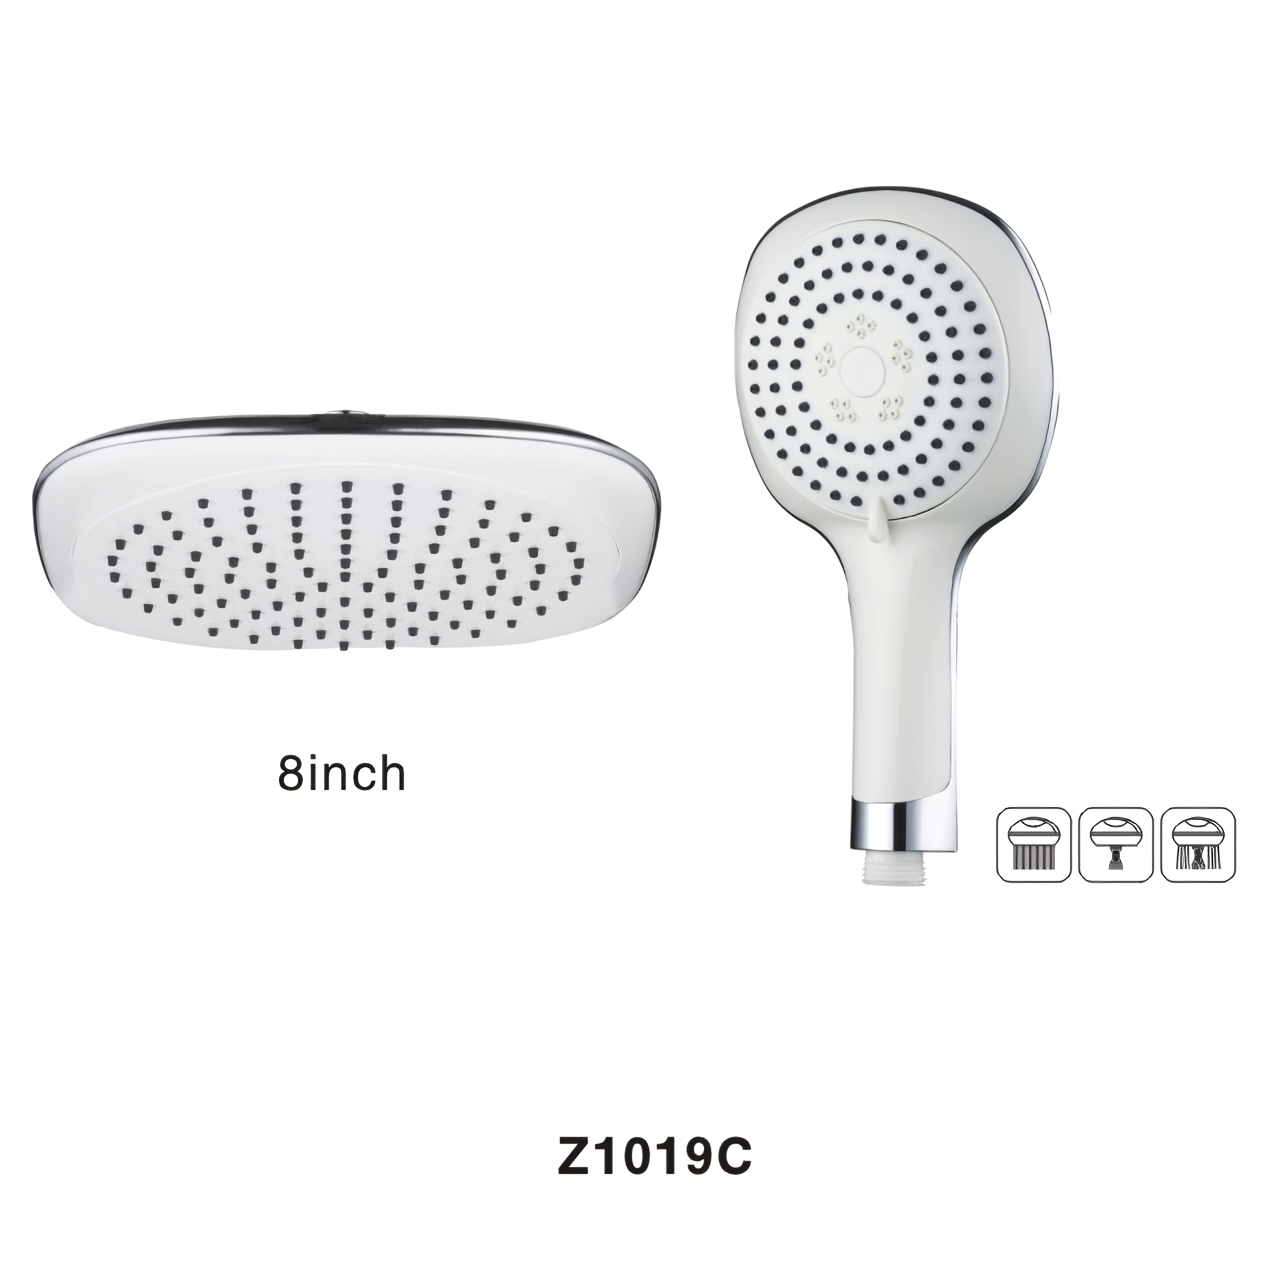 Z1019C Square Shower Head 8 Inch Angle Adjustable High Flow Rainfall Shower head Three Functions Handheld Shower for Luxury Shower Experience Plastic Shower Head